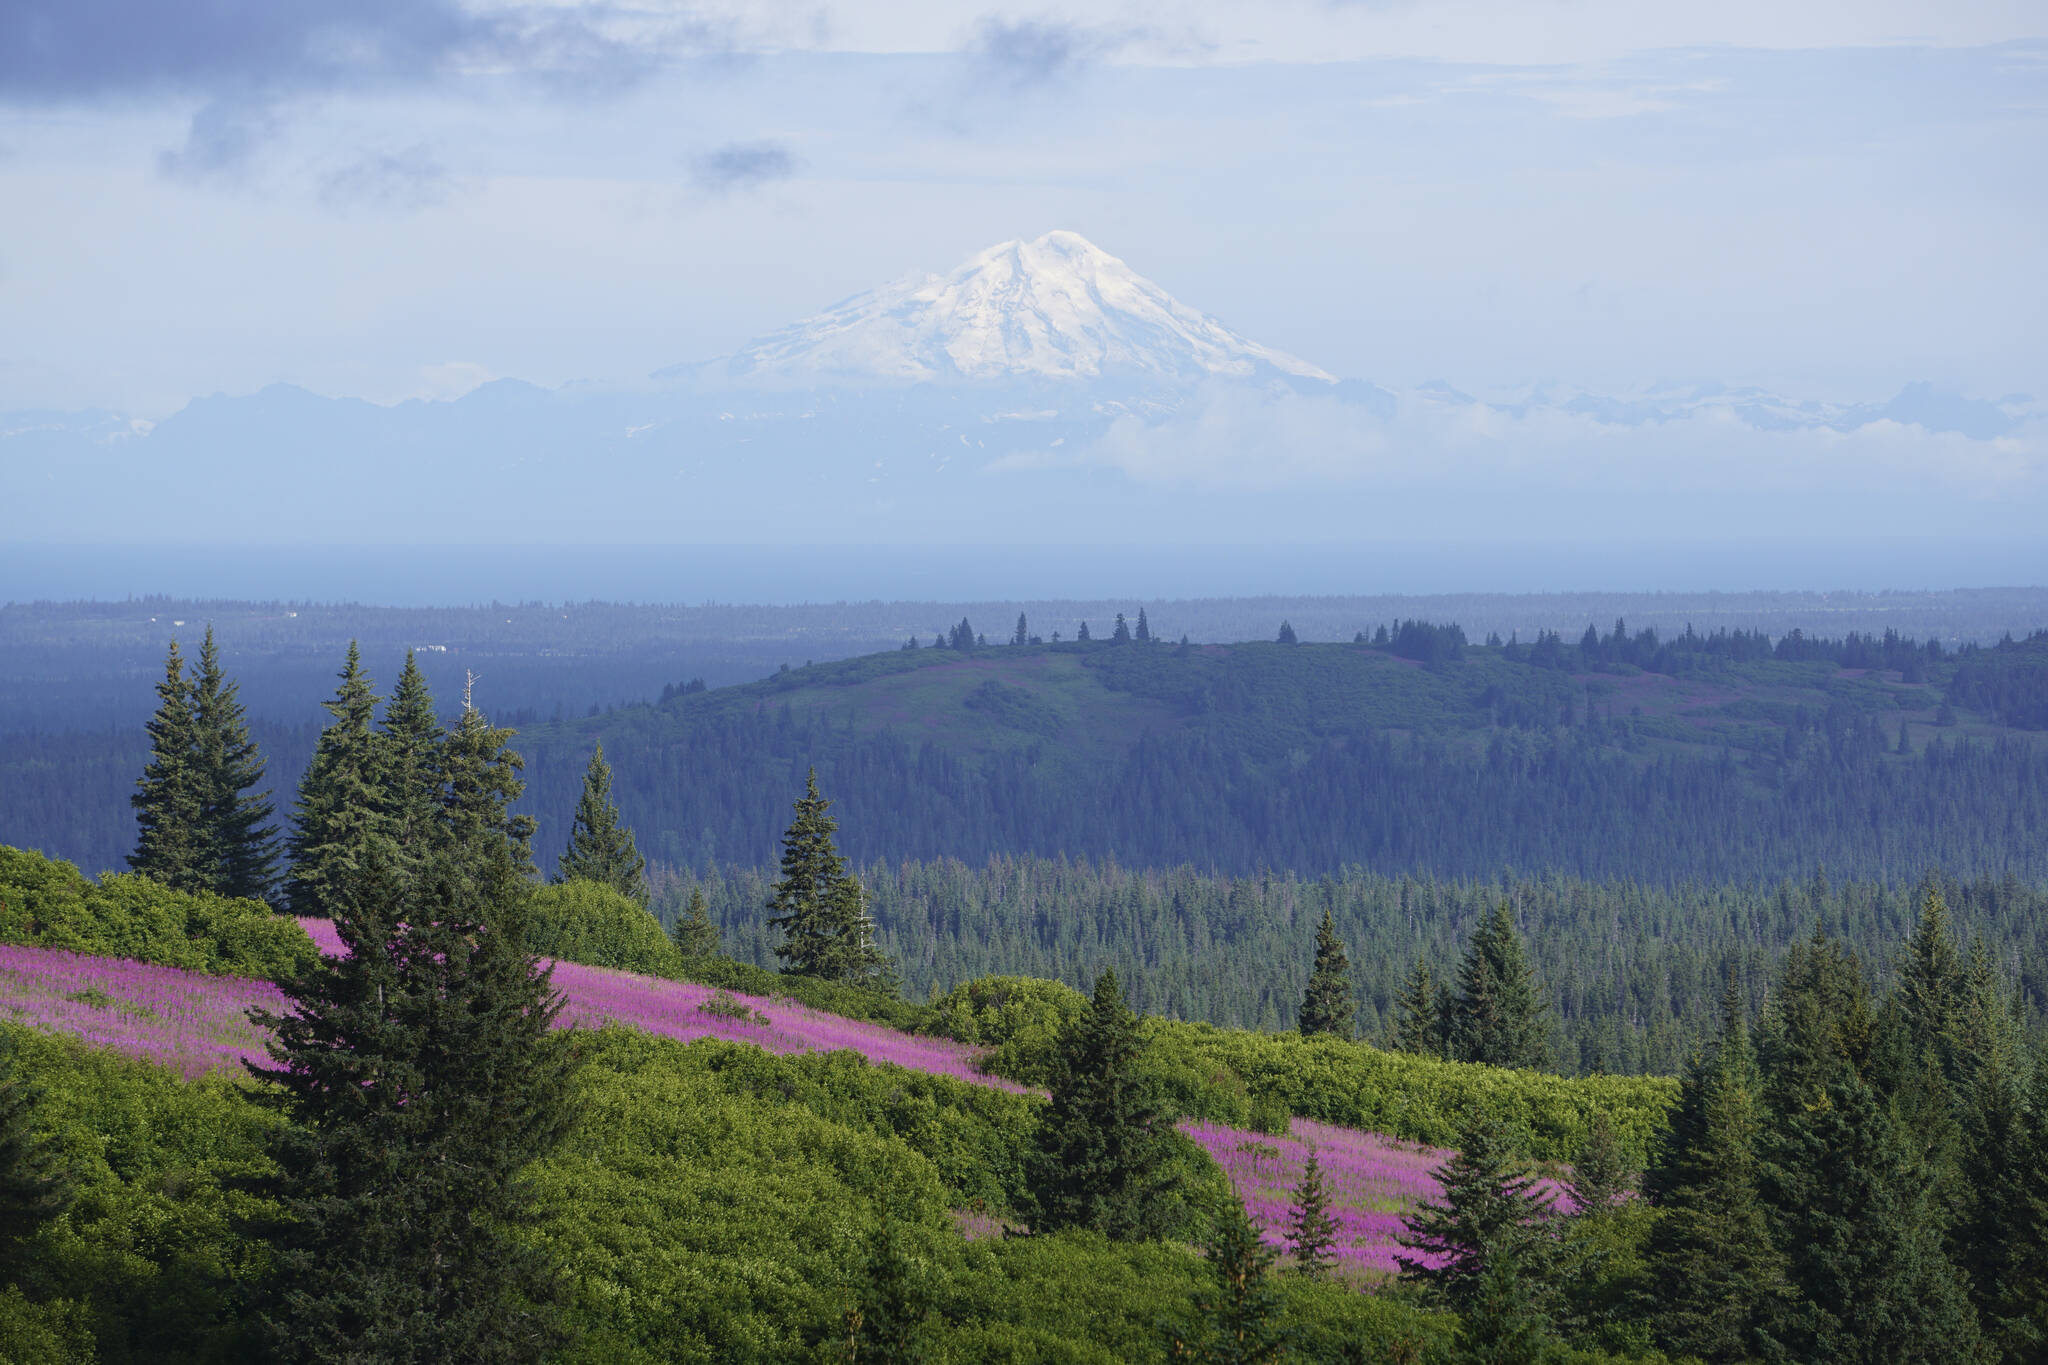 Mt. Redoubt rises above Cook Inlet and the Anchor River drainage as fireweed is in bloom, as seen from Diamond Ridge Road on Friday, July 22, 2022, near Homer, Alaska. (Photo by Michael Armstrong/Homer News)